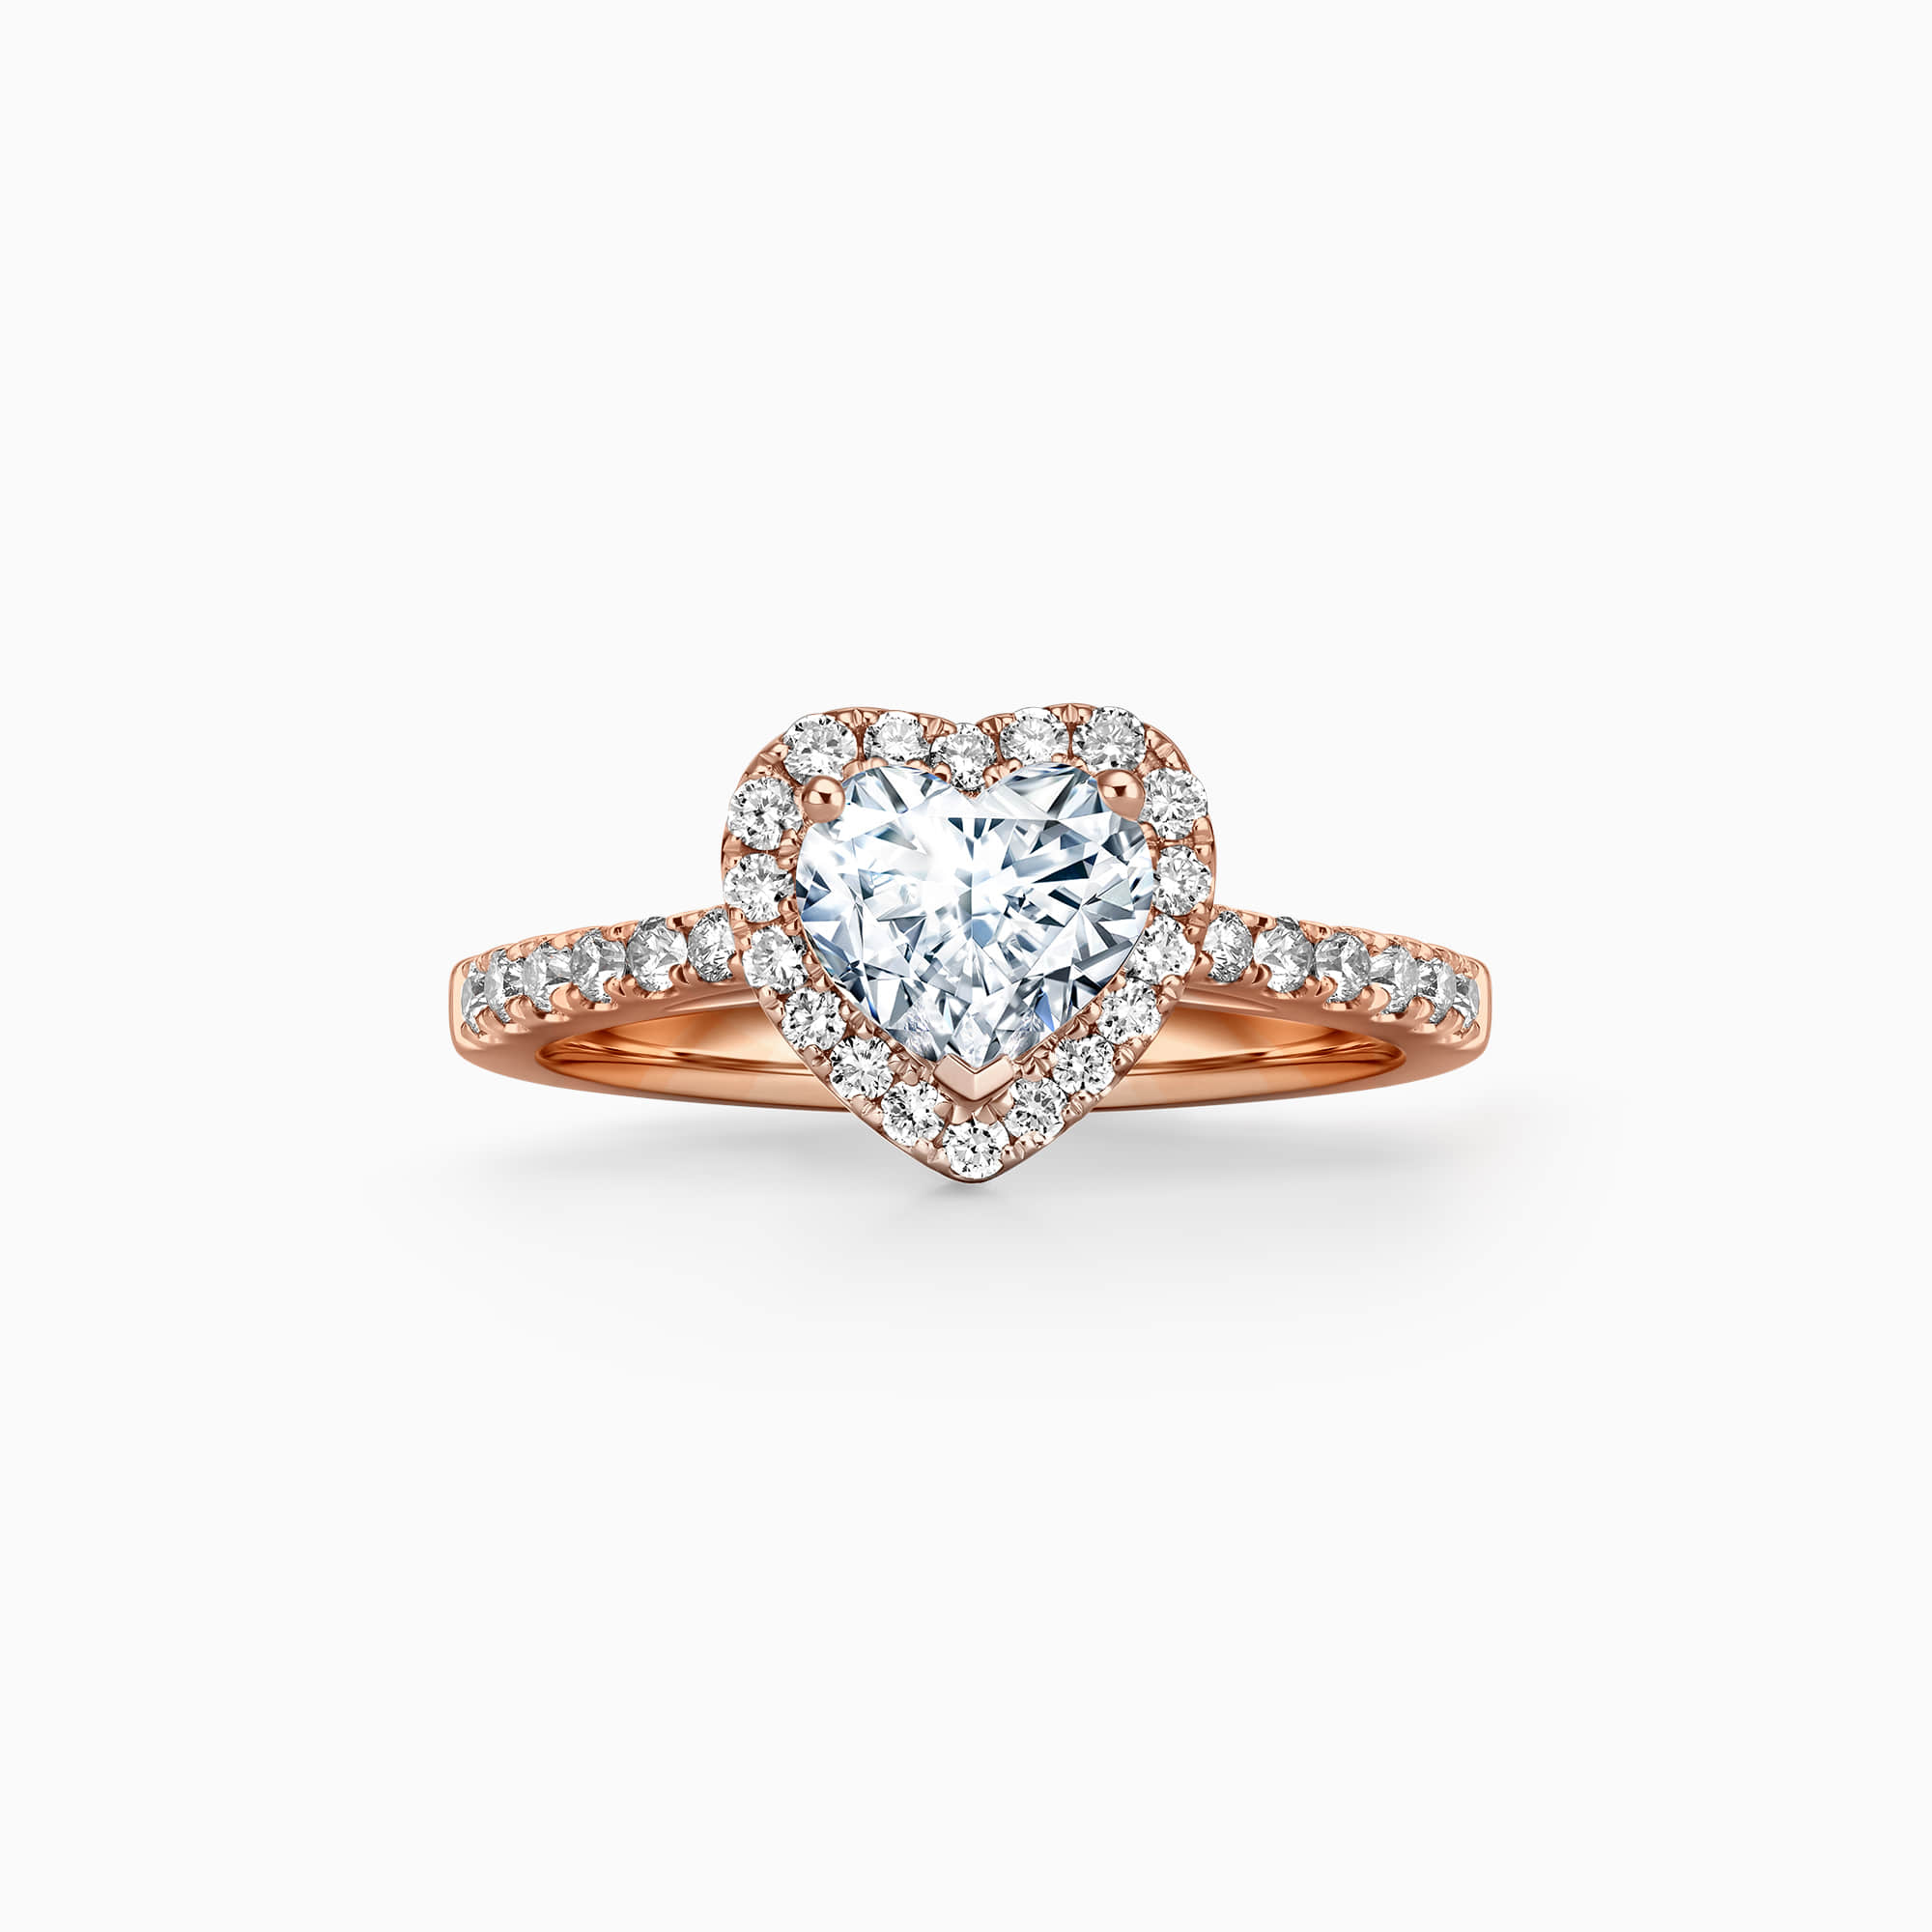 Darry Ring heart halo engagement ring in rose gold